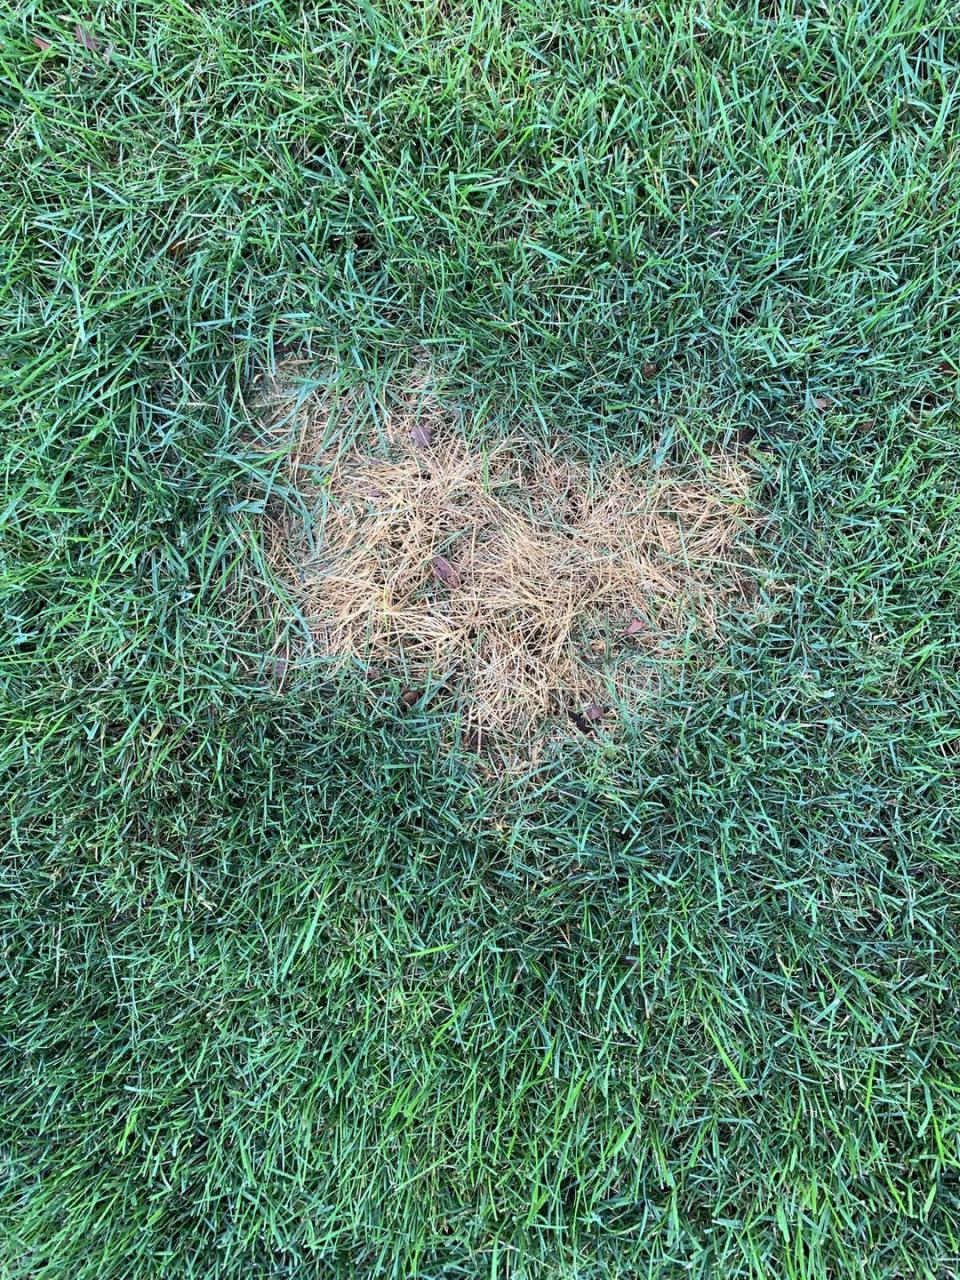 Patch Bare Spots in Your Lawn